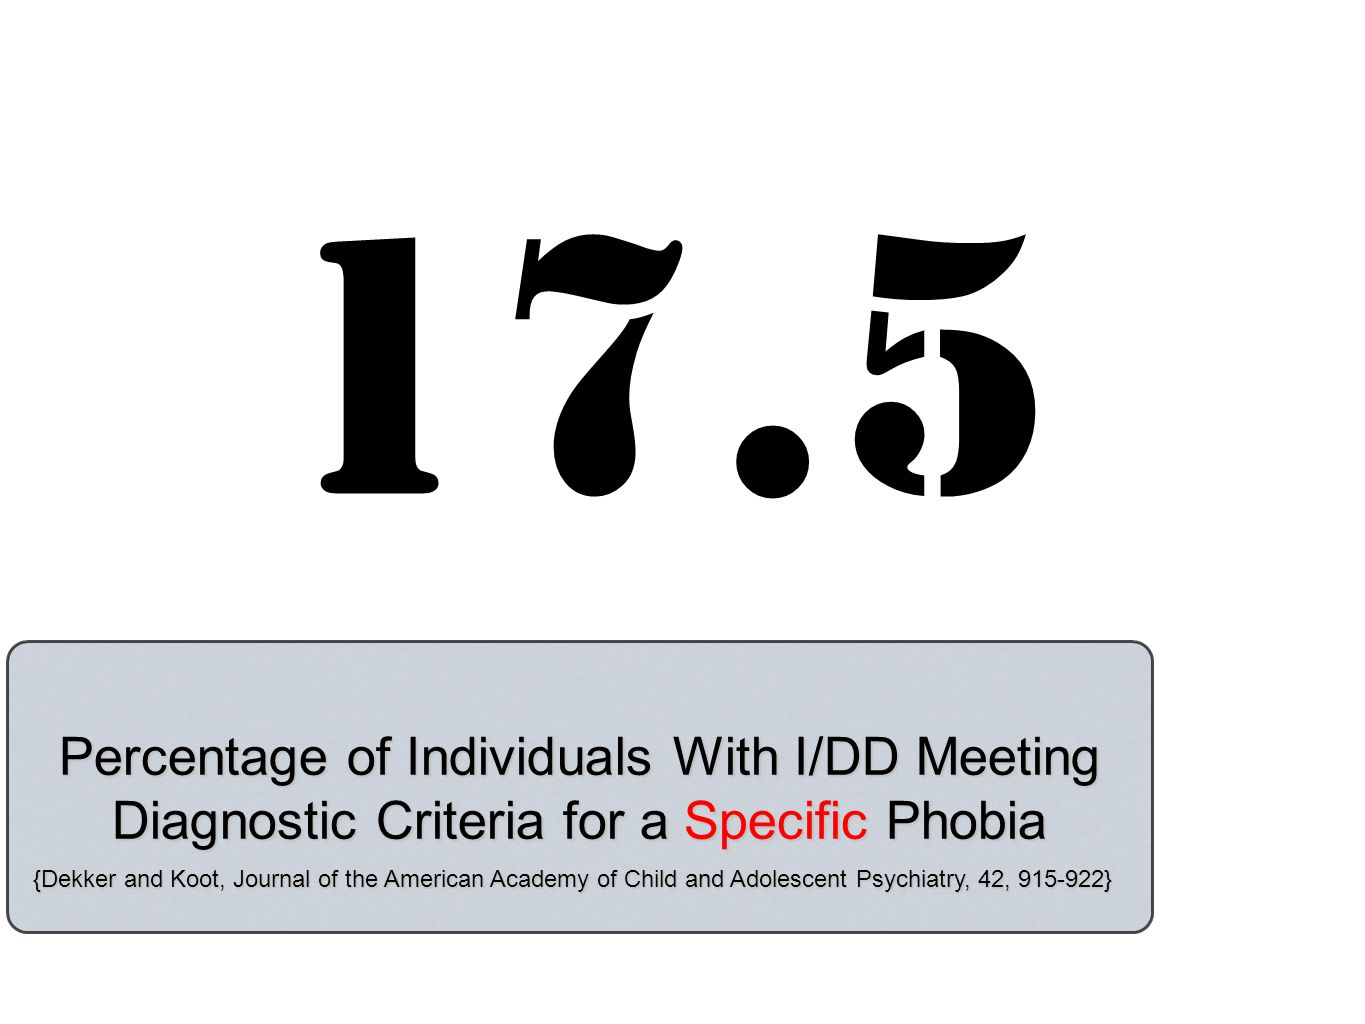 Percentage of Individuals With I/DD Meeting Diagnostic Criteria for a Specific Phobia 17.5 {Dekker and Koot, Journal of the American Academy of Child and Adolescent Psychiatry, 42, }